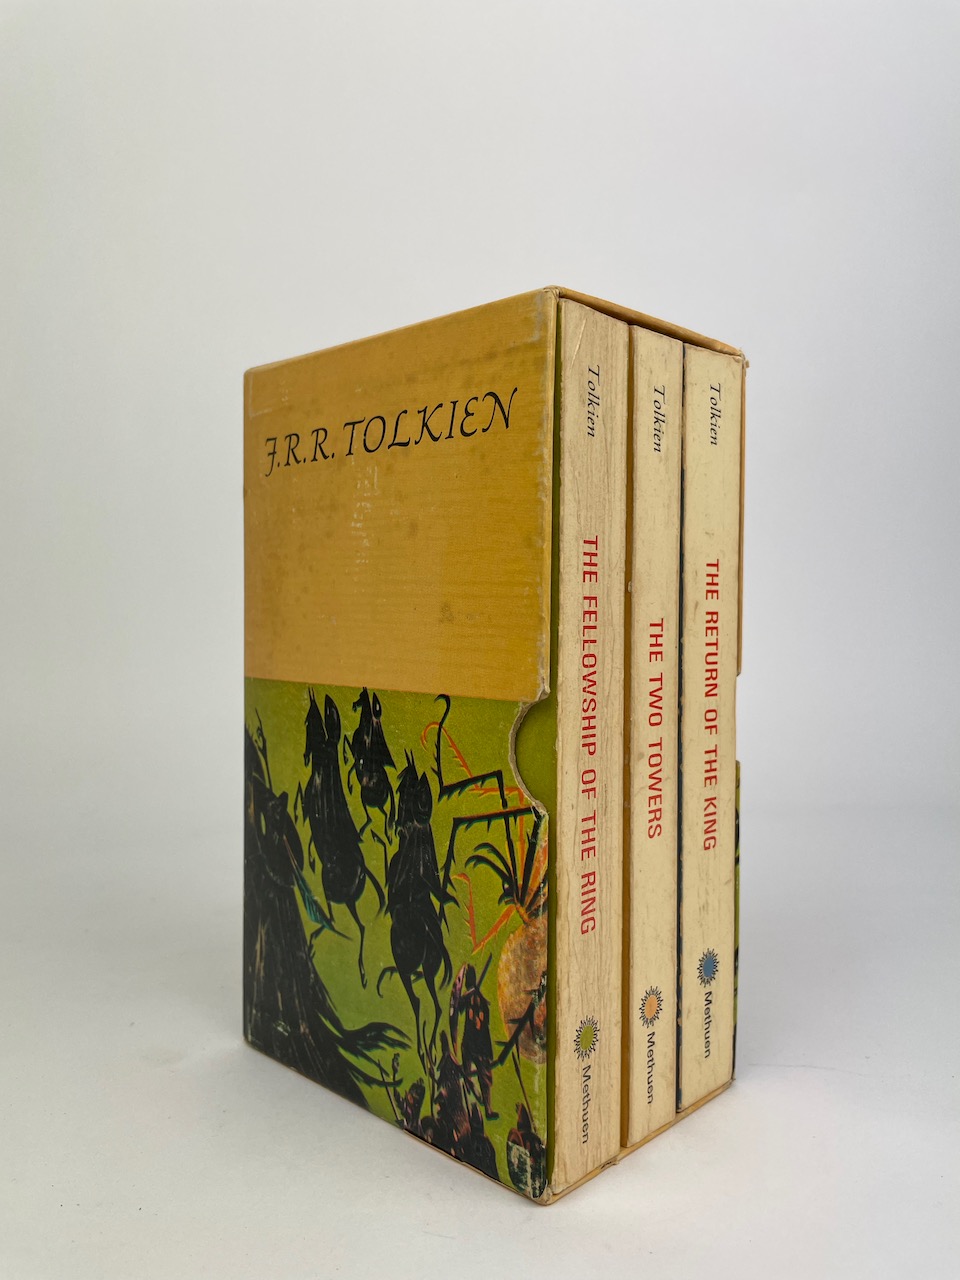 J.R.R. Tolkien, The Lord of the Rings in slipcase released in 1973 by Methuen Publications